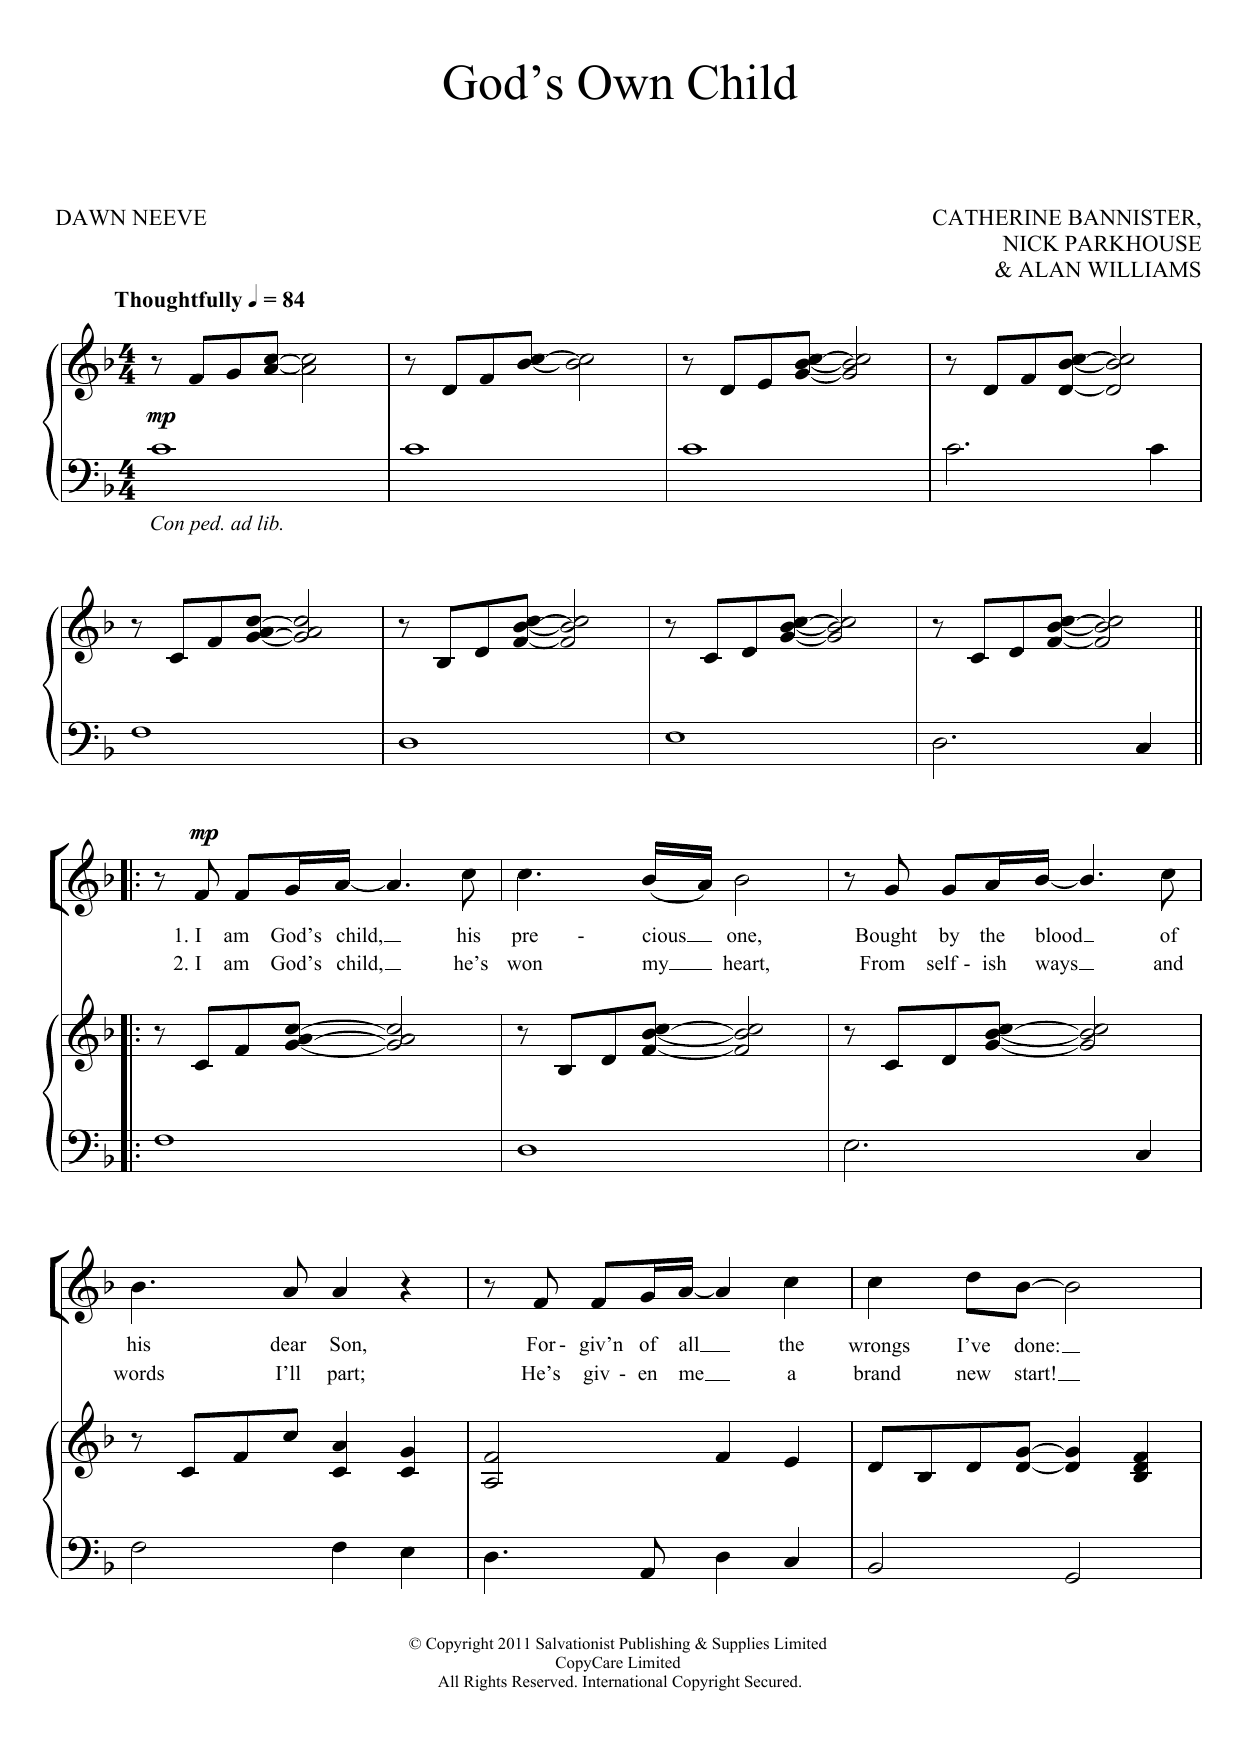 Download The Salvation Army God's Own Child Sheet Music